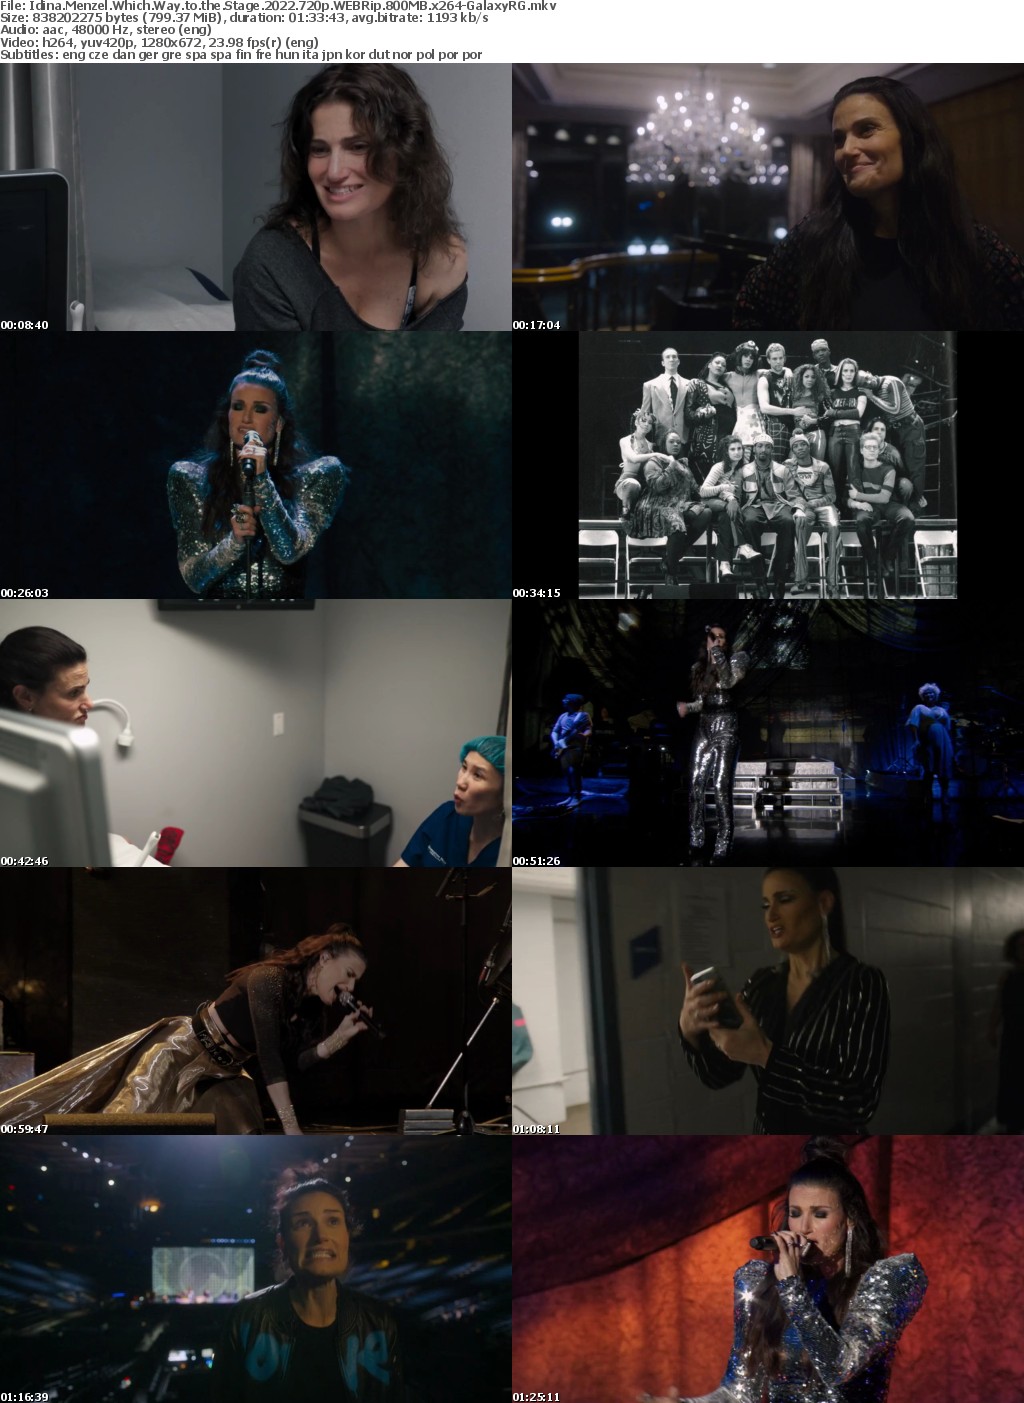 Idina Menzel Which Way to the Stage 2022 720p WEBRip 800MB x264-GalaxyRG